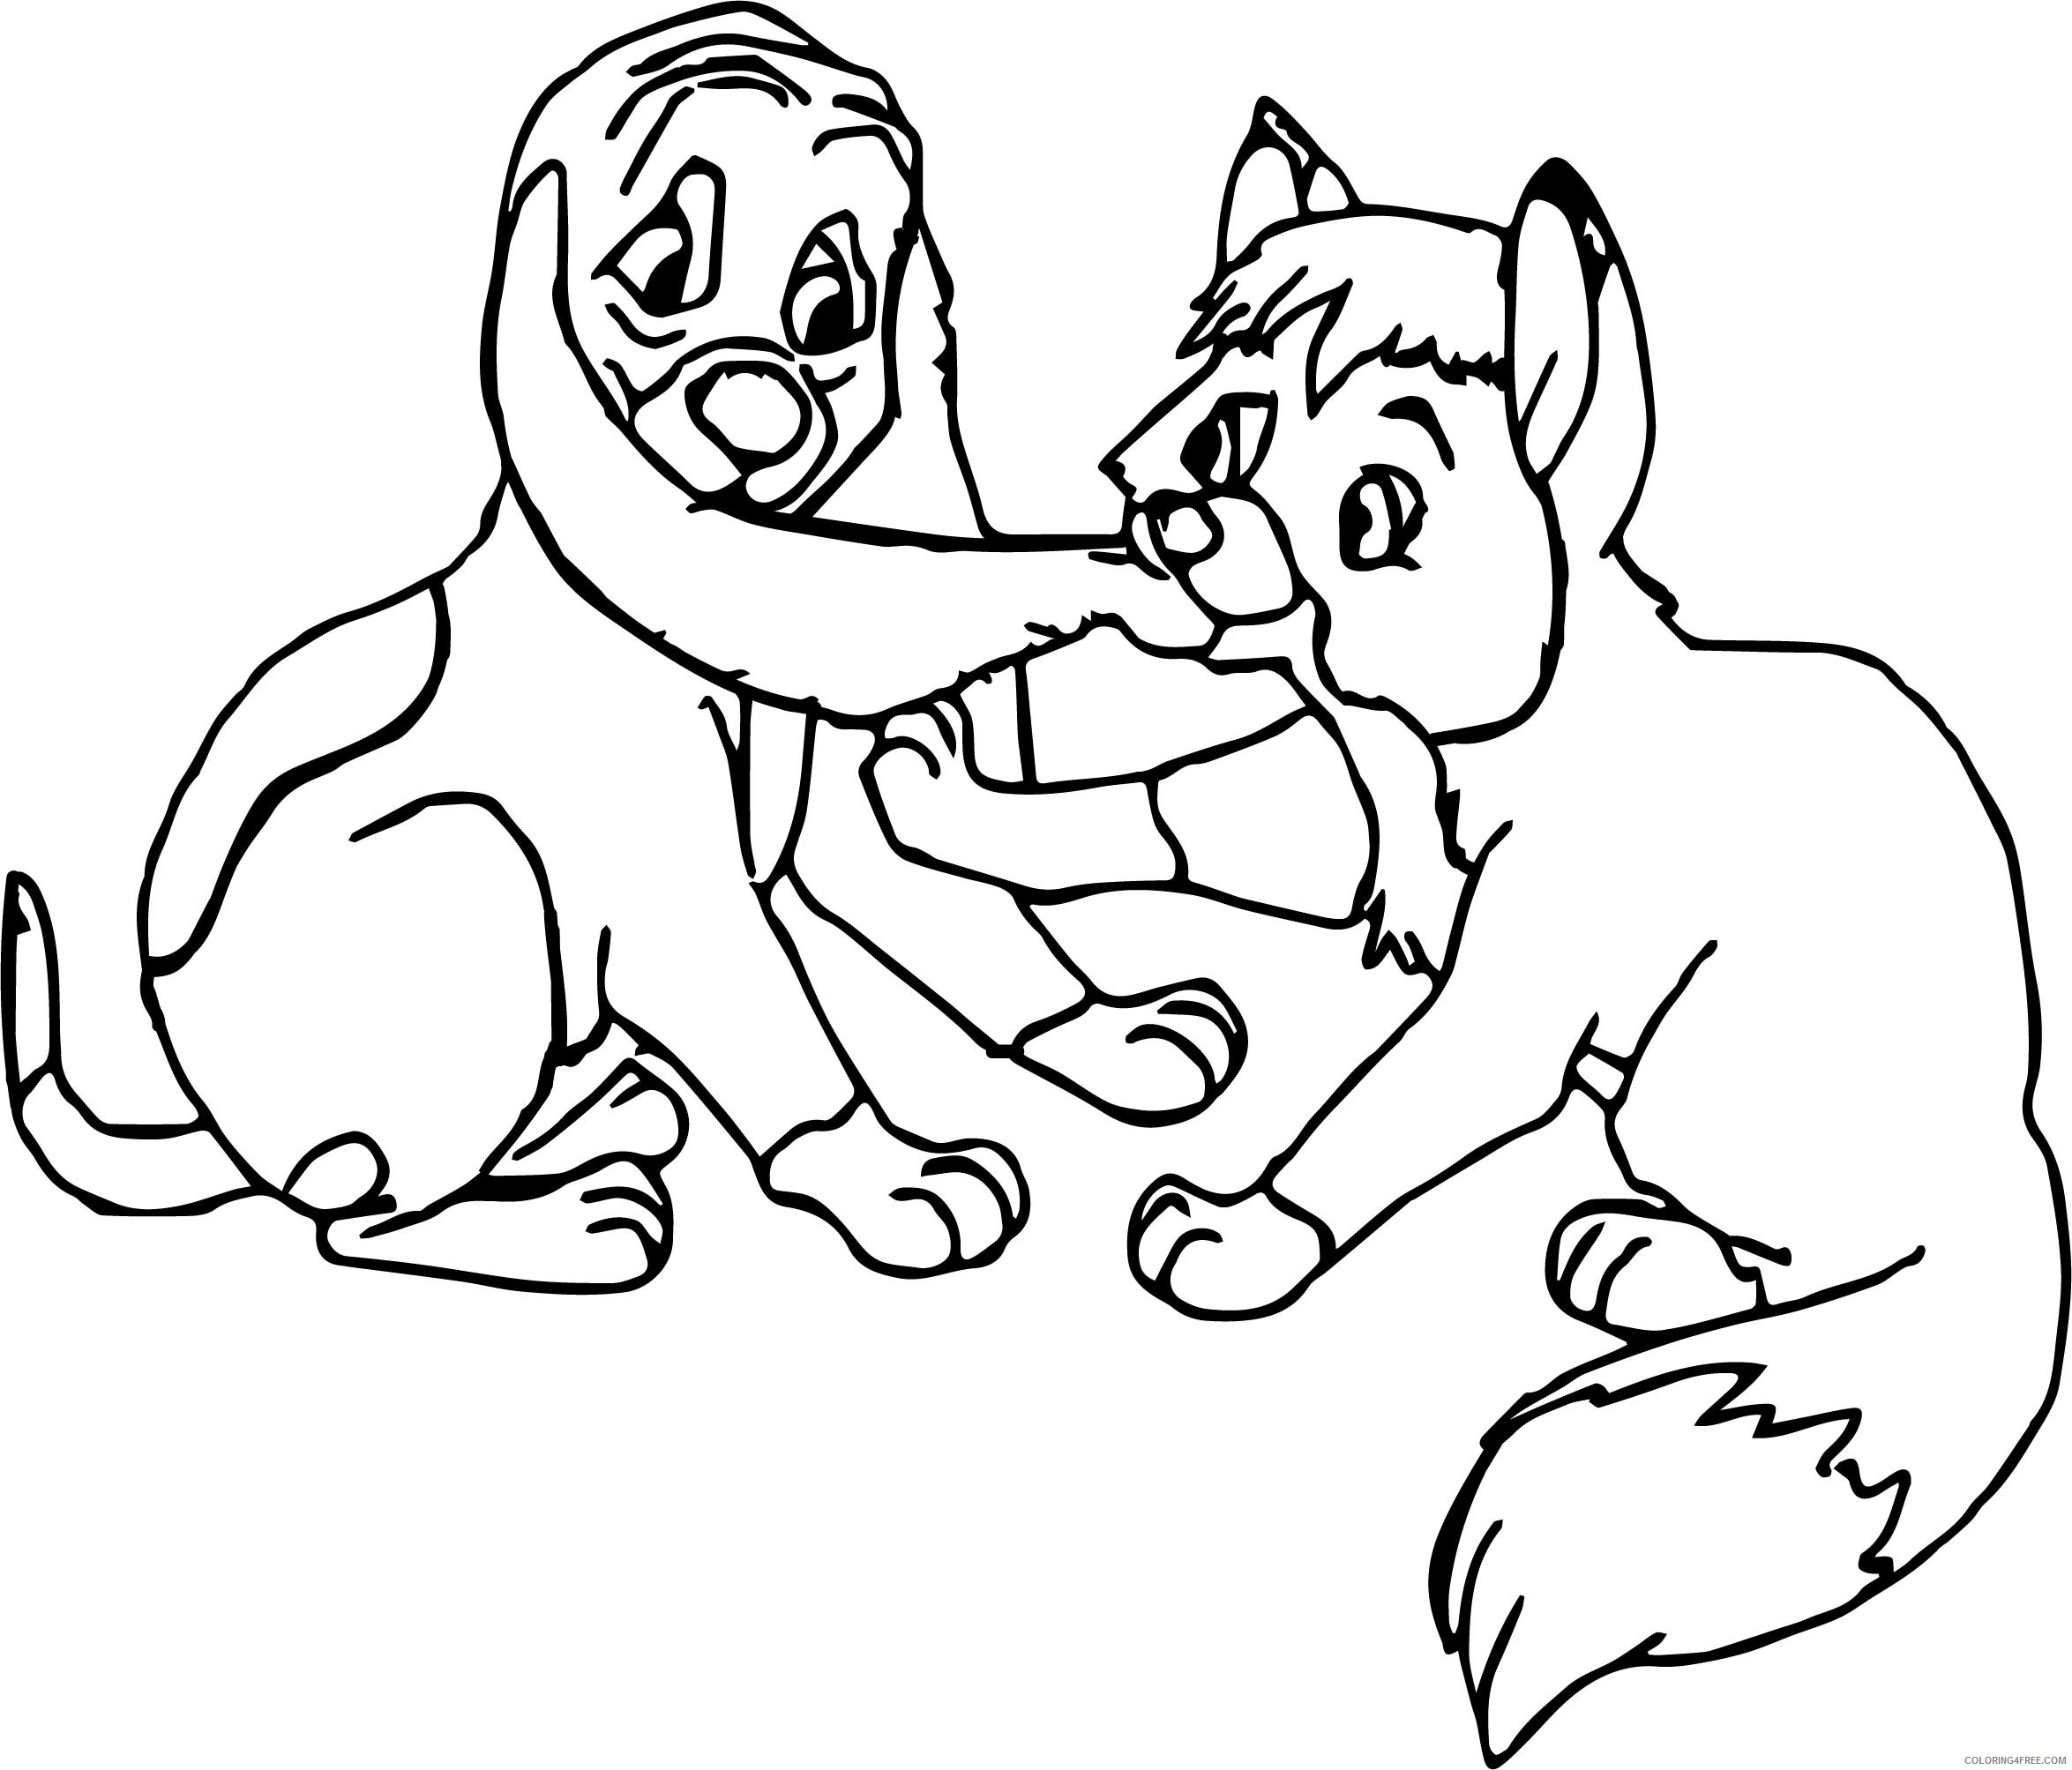 Fox and the Hound Coloring Pages Cartoons Friends Fox and the Hound Printable 2020 2776 Coloring4free